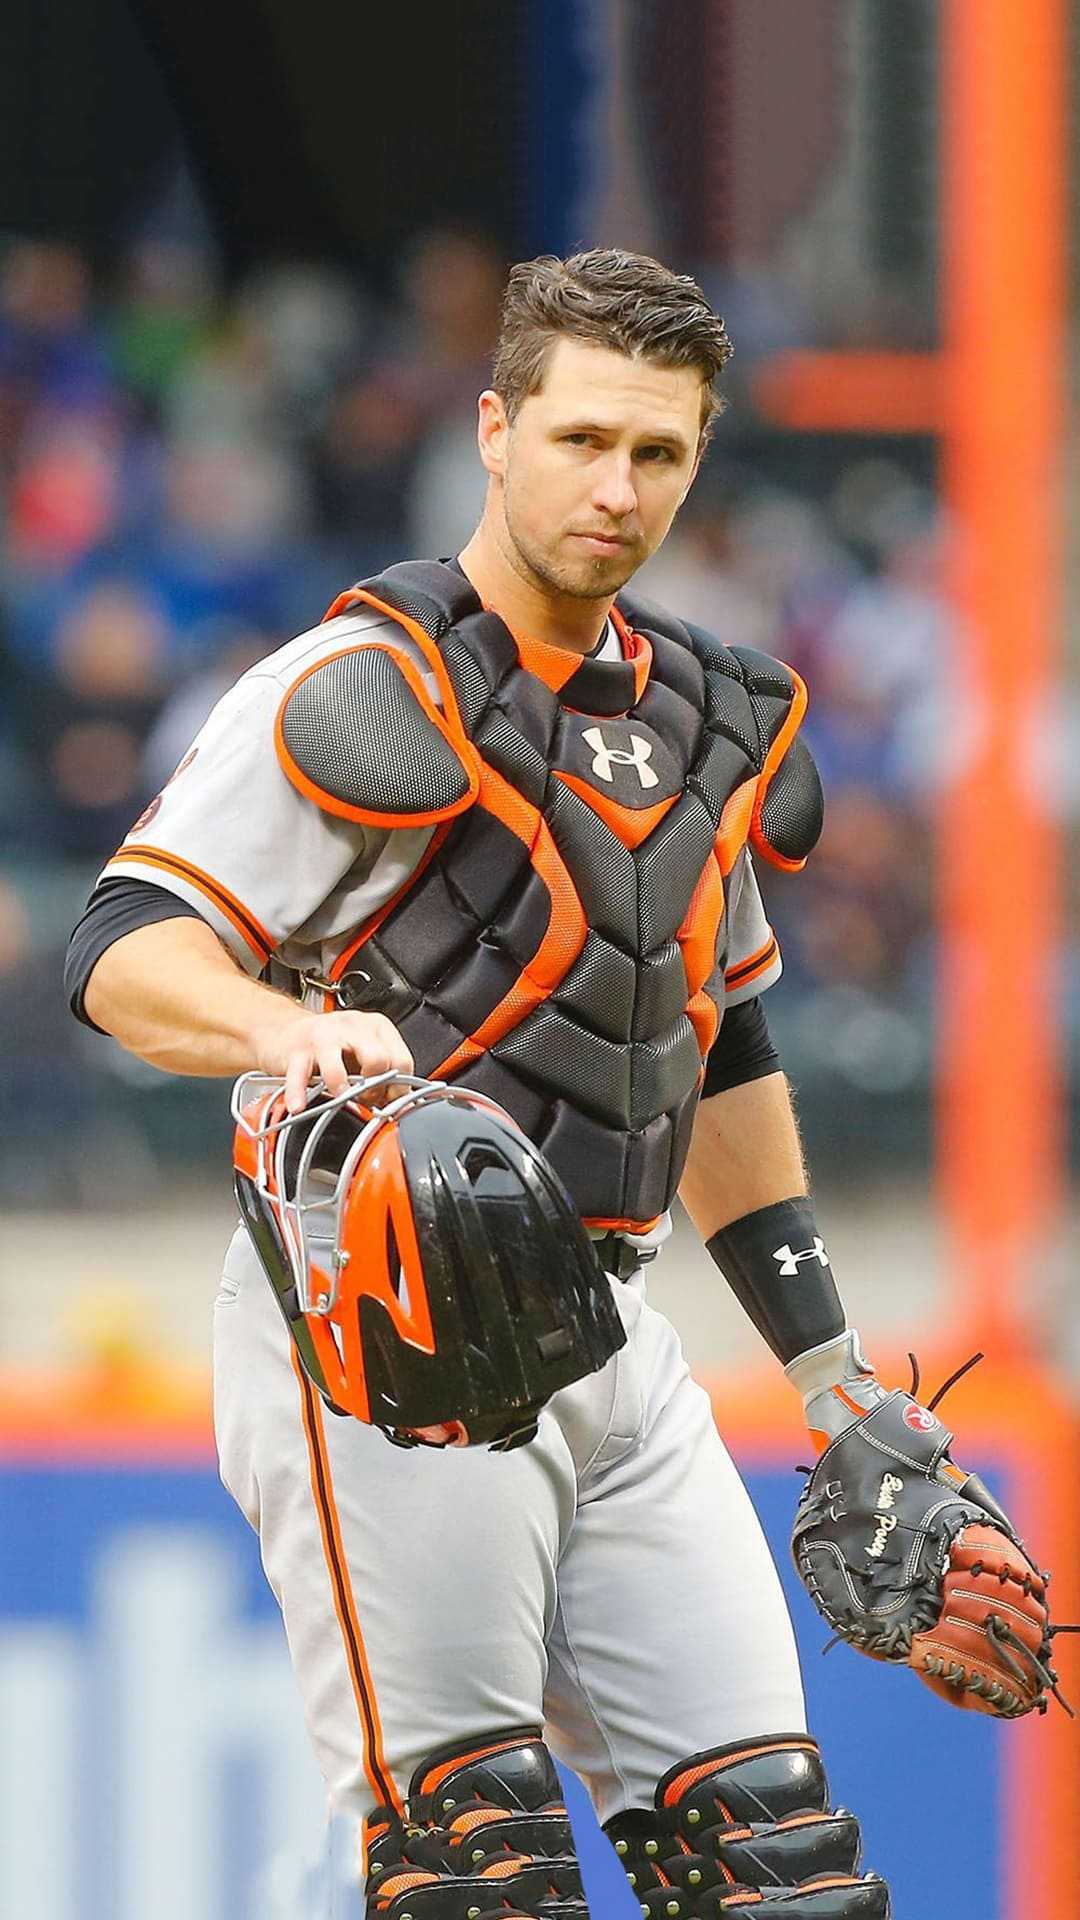 Buster Posey Wallpaper - iXpap